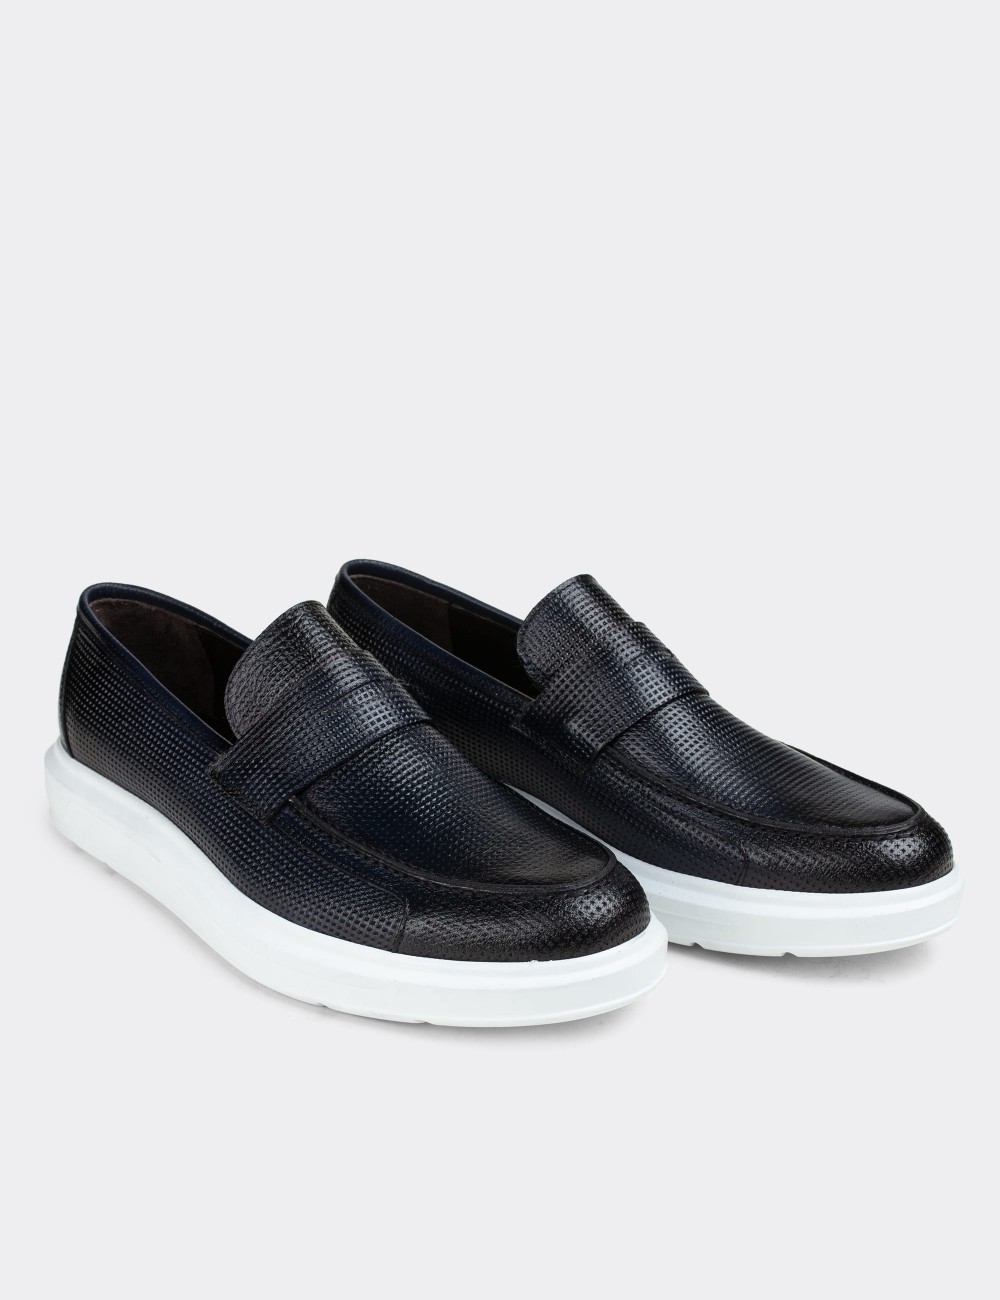 Navy  Leather Loafers - 01564MLCVP10